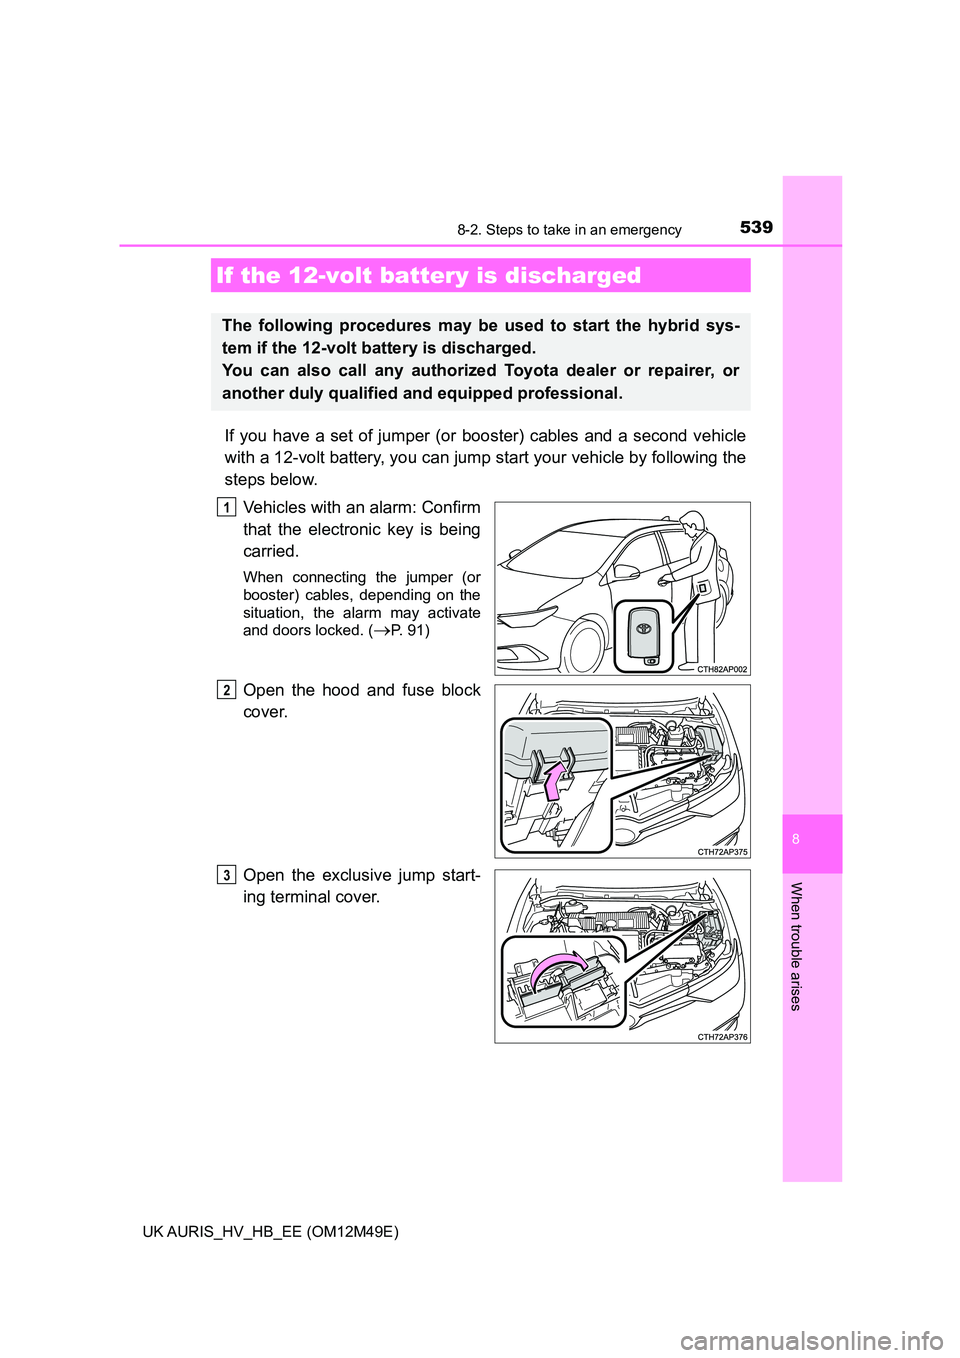 TOYOTA AURIS 2018  Owners Manual (in English) 5398-2. Steps to take in an emergency
UK AURIS_HV_HB_EE (OM12M49E)
8
When trouble arises
If you have a set of jumper (or booster) cables and a second vehicle 
with a 12-volt battery, you can jump  sta